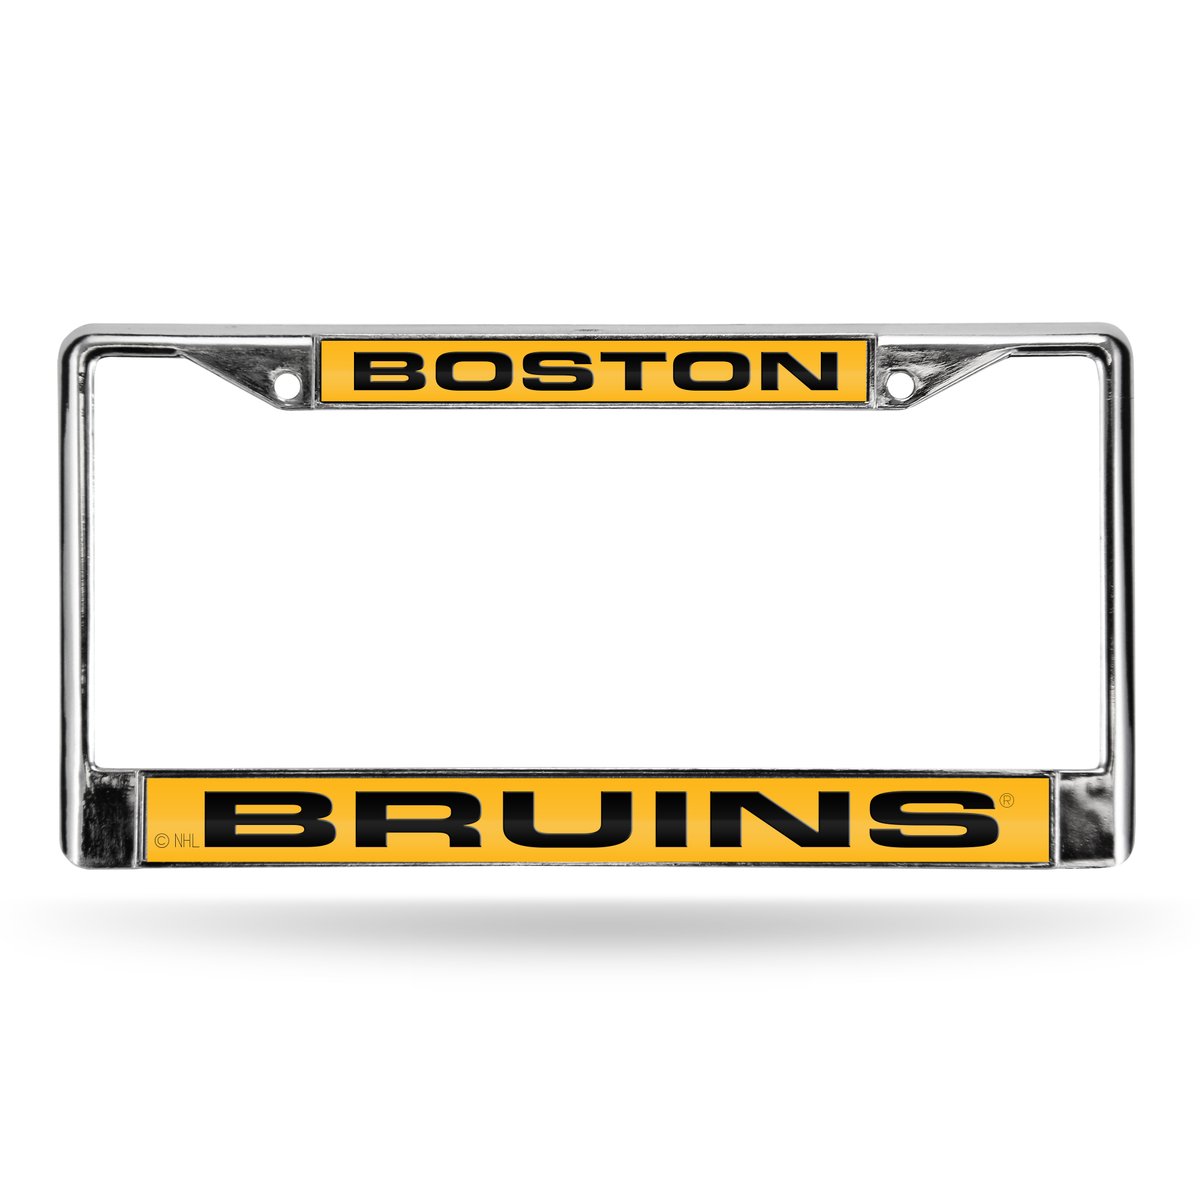 Picture of Rico Industries FCL7302 12 x 6 in. Boston Bruins Laser Chrome License Plate Frame